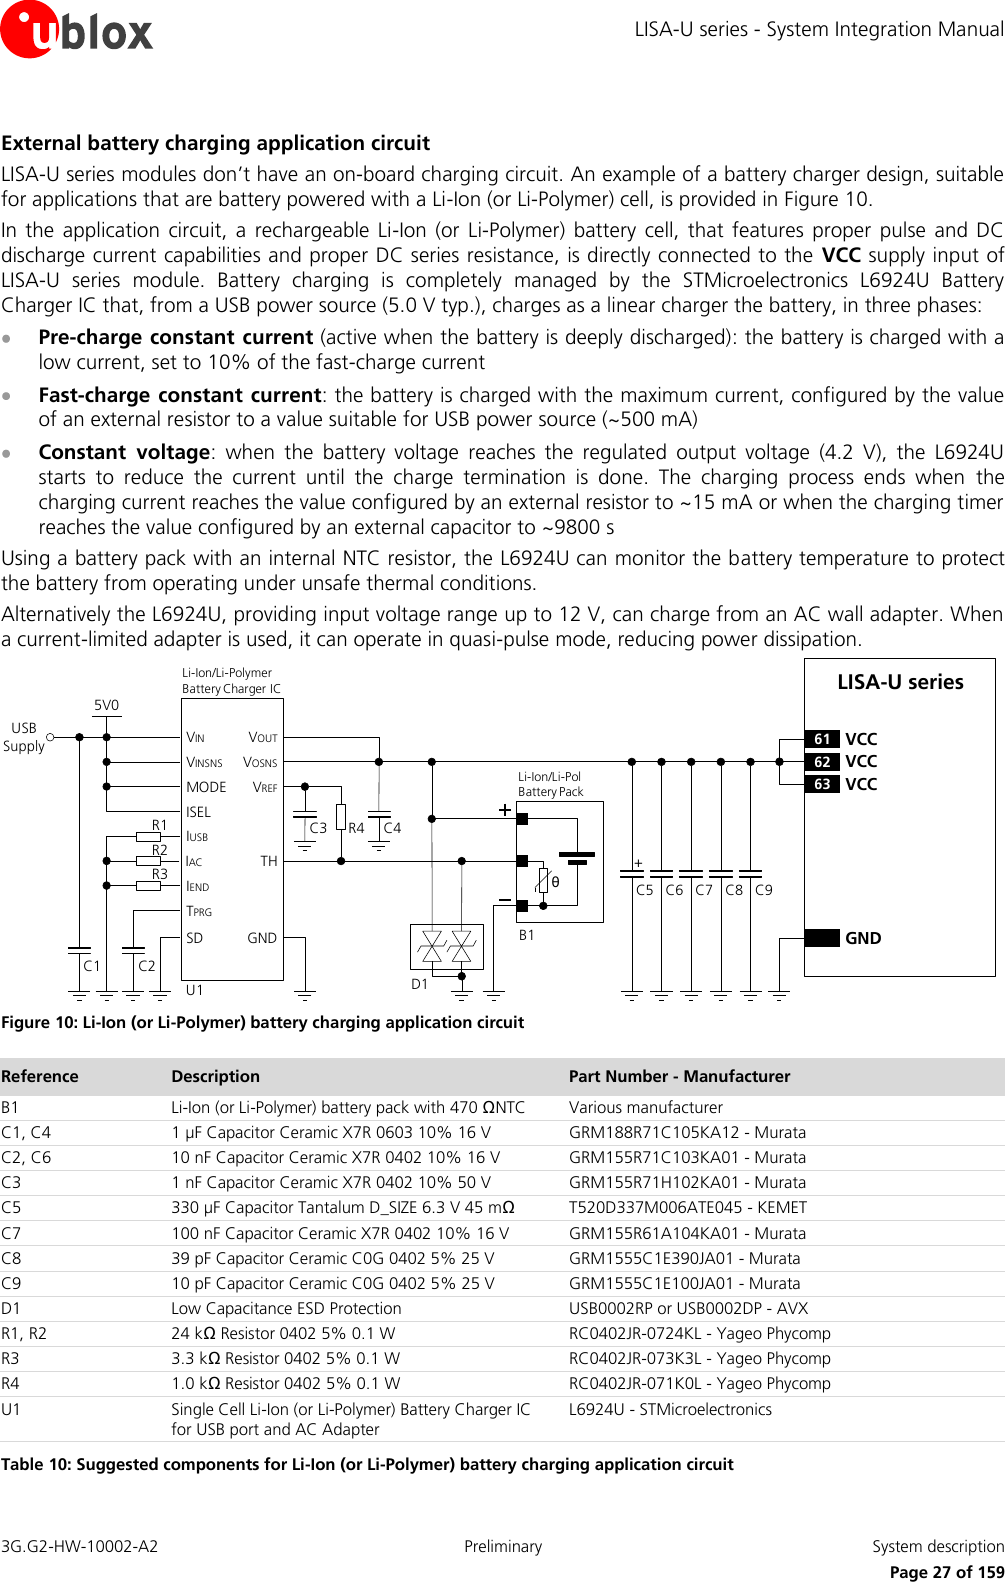 LISA-U series - System Integration Manual 3G.G2-HW-10002-A2  Preliminary  System description      Page 27 of 159 External battery charging application circuit LISA-U series modules don’t have an on-board charging circuit. An example of a battery charger design, suitable for applications that are battery powered with a Li-Ion (or Li-Polymer) cell, is provided in Figure 10. In the  application  circuit,  a  rechargeable  Li-Ion (or  Li-Polymer)  battery  cell,  that features  proper pulse  and  DC discharge current capabilities and proper DC series resistance, is directly connected to the  VCC supply input of LISA-U  series  module.  Battery  charging  is  completely  managed  by  the  STMicroelectronics  L6924U  Battery Charger IC that, from a USB power source (5.0 V typ.), charges as a linear charger the battery, in three phases:  Pre-charge constant current (active when the battery is deeply discharged): the battery is charged with a low current, set to 10% of the fast-charge current  Fast-charge constant  current: the battery is charged with the maximum current, configured by the value of an external resistor to a value suitable for USB power source (~500 mA)  Constant  voltage:  when  the  battery  voltage  reaches  the  regulated  output  voltage  (4.2  V),  the  L6924U starts  to  reduce  the  current  until  the  charge  termination  is  done.  The  charging  process  ends  when  the charging current reaches the value configured by an external resistor to ~15 mA or when the charging timer reaches the value configured by an external capacitor to ~9800 s Using a battery pack with an internal NTC resistor, the L6924U can monitor the battery temperature to protect the battery from operating under unsafe thermal conditions. Alternatively the L6924U, providing input voltage range up to 12 V, can charge from an AC wall adapter. When a current-limited adapter is used, it can operate in quasi-pulse mode, reducing power dissipation. C5 C8GNDC7C6 C9LISA-U series62 VCC63 VCC61 VCC+USB SupplyC3 R4θU1IUSBIACIENDTPRGSDVINVINSNSMODEISELC2C15V0THGNDVOUTVOSNSVREFR1R2R3Li-Ion/Li-Pol Battery PackD1B1C4Li-Ion/Li-Polymer    Battery Charger IC Figure 10: Li-Ion (or Li-Polymer) battery charging application circuit Reference Description Part Number - Manufacturer B1 Li-Ion (or Li-Polymer) battery pack with 470 Ω NTC Various manufacturer C1, C4 1 µF Capacitor Ceramic X7R 0603 10% 16 V GRM188R71C105KA12 - Murata C2, C6 10 nF Capacitor Ceramic X7R 0402 10% 16 V GRM155R71C103KA01 - Murata C3 1 nF Capacitor Ceramic X7R 0402 10% 50 V GRM155R71H102KA01 - Murata C5 330 µF Capacitor Tantalum D_SIZE 6.3 V 45 mΩ T520D337M006ATE045 - KEMET C7 100 nF Capacitor Ceramic X7R 0402 10% 16 V GRM155R61A104KA01 - Murata C8 39 pF Capacitor Ceramic C0G 0402 5% 25 V GRM1555C1E390JA01 - Murata C9 10 pF Capacitor Ceramic C0G 0402 5% 25 V GRM1555C1E100JA01 - Murata D1 Low Capacitance ESD Protection USB0002RP or USB0002DP - AVX R1, R2 24 kΩ Resistor 0402 5% 0.1 W RC0402JR-0724KL - Yageo Phycomp R3 3.3 kΩ Resistor 0402 5% 0.1 W RC0402JR-073K3L - Yageo Phycomp R4 1.0 kΩ Resistor 0402 5% 0.1 W RC0402JR-071K0L - Yageo Phycomp U1 Single Cell Li-Ion (or Li-Polymer) Battery Charger IC for USB port and AC Adapter L6924U - STMicroelectronics Table 10: Suggested components for Li-Ion (or Li-Polymer) battery charging application circuit  